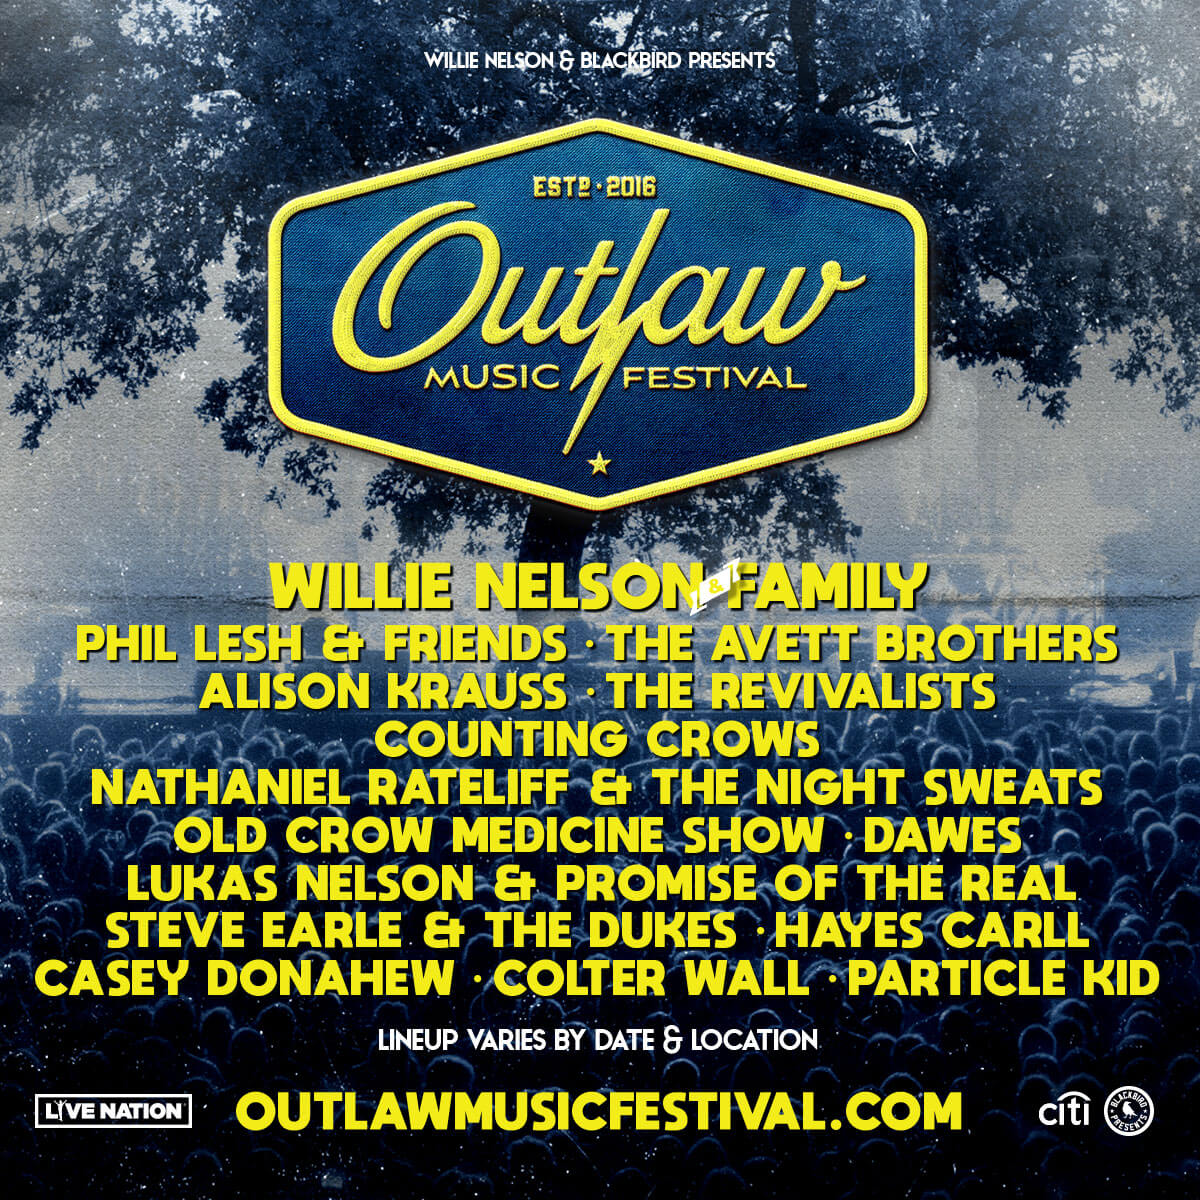 image for Outlaw Music Fest